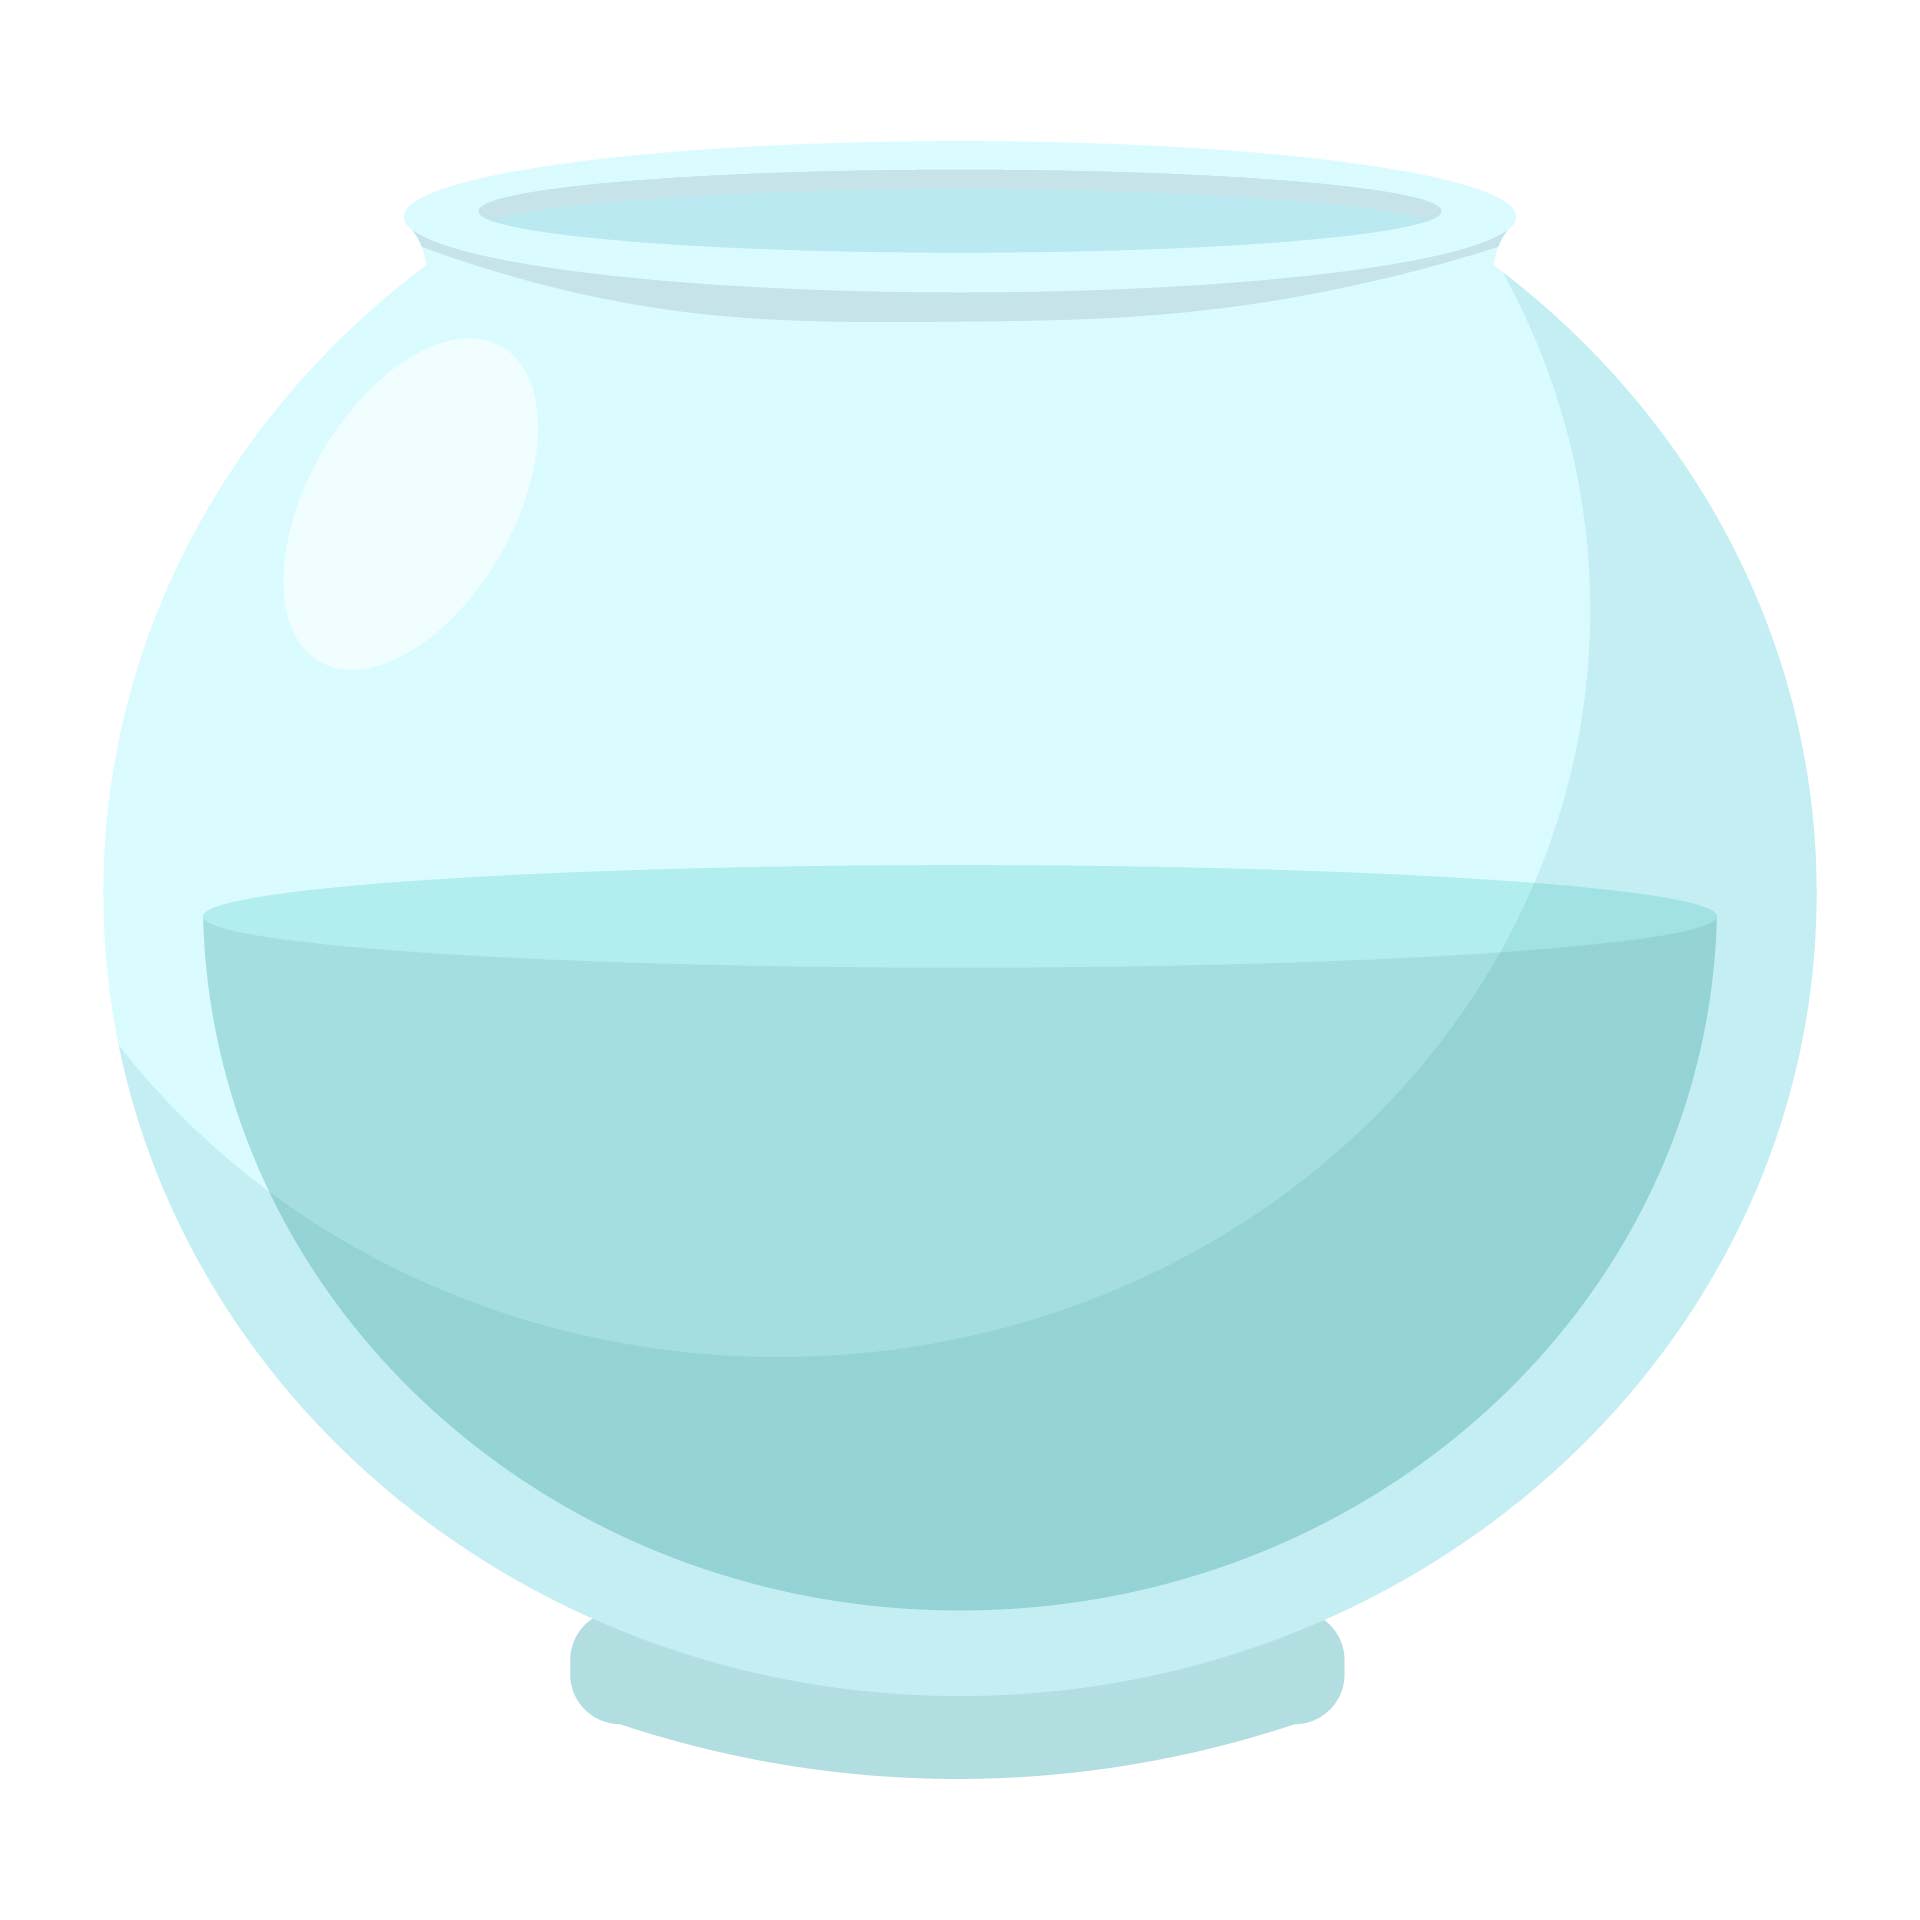 6 Best Images of Fish Bowl Template Printable Fish Bowl Template